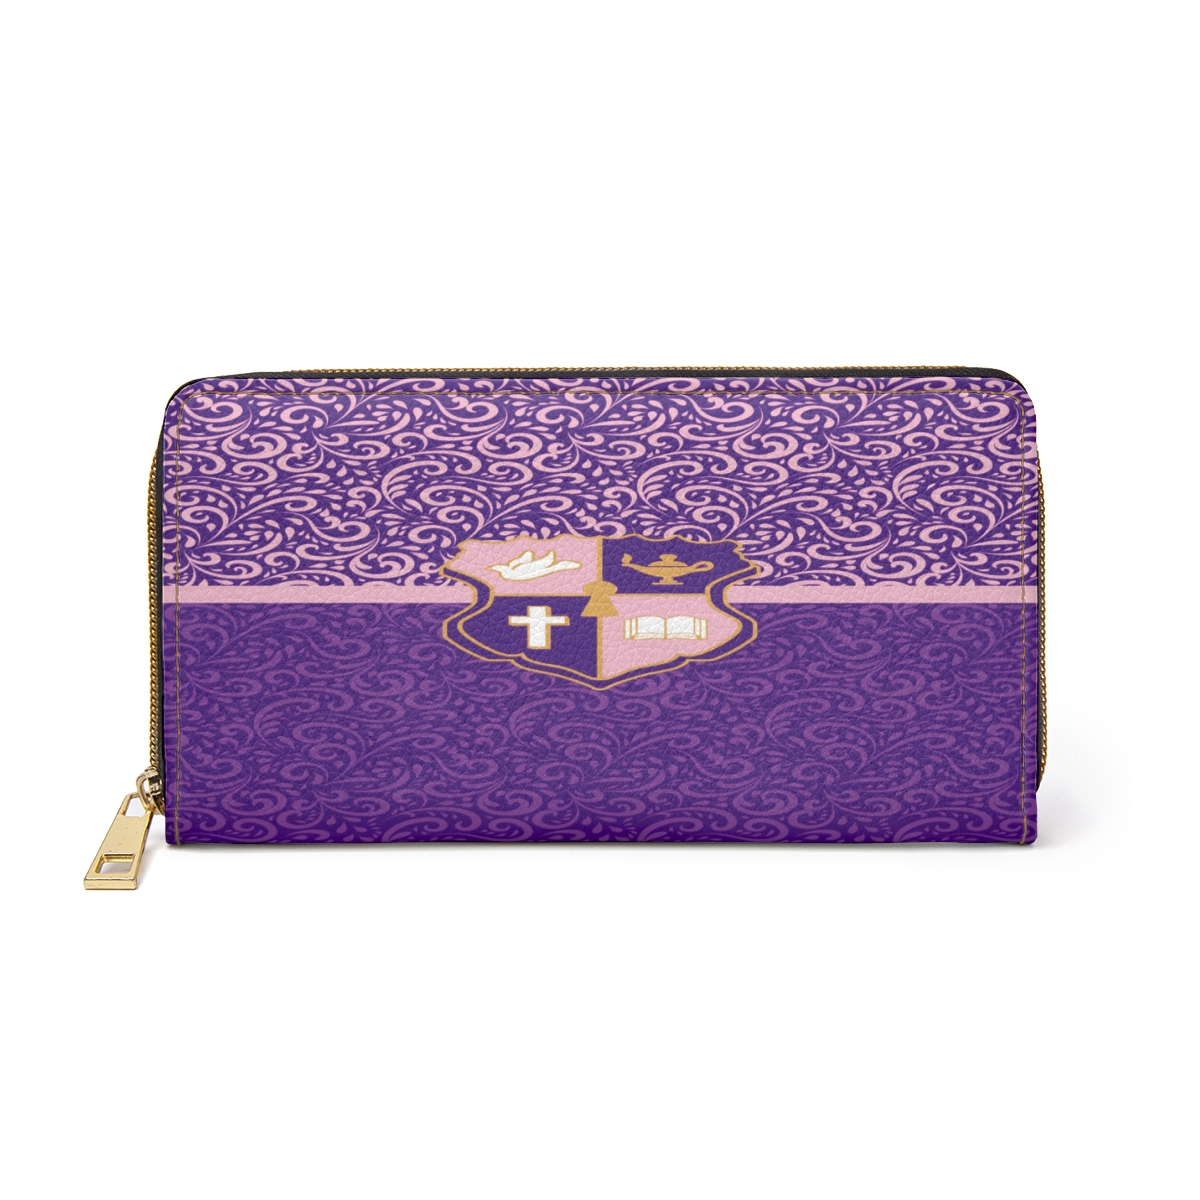 Purple designer wallet with ornate pattern and crest.